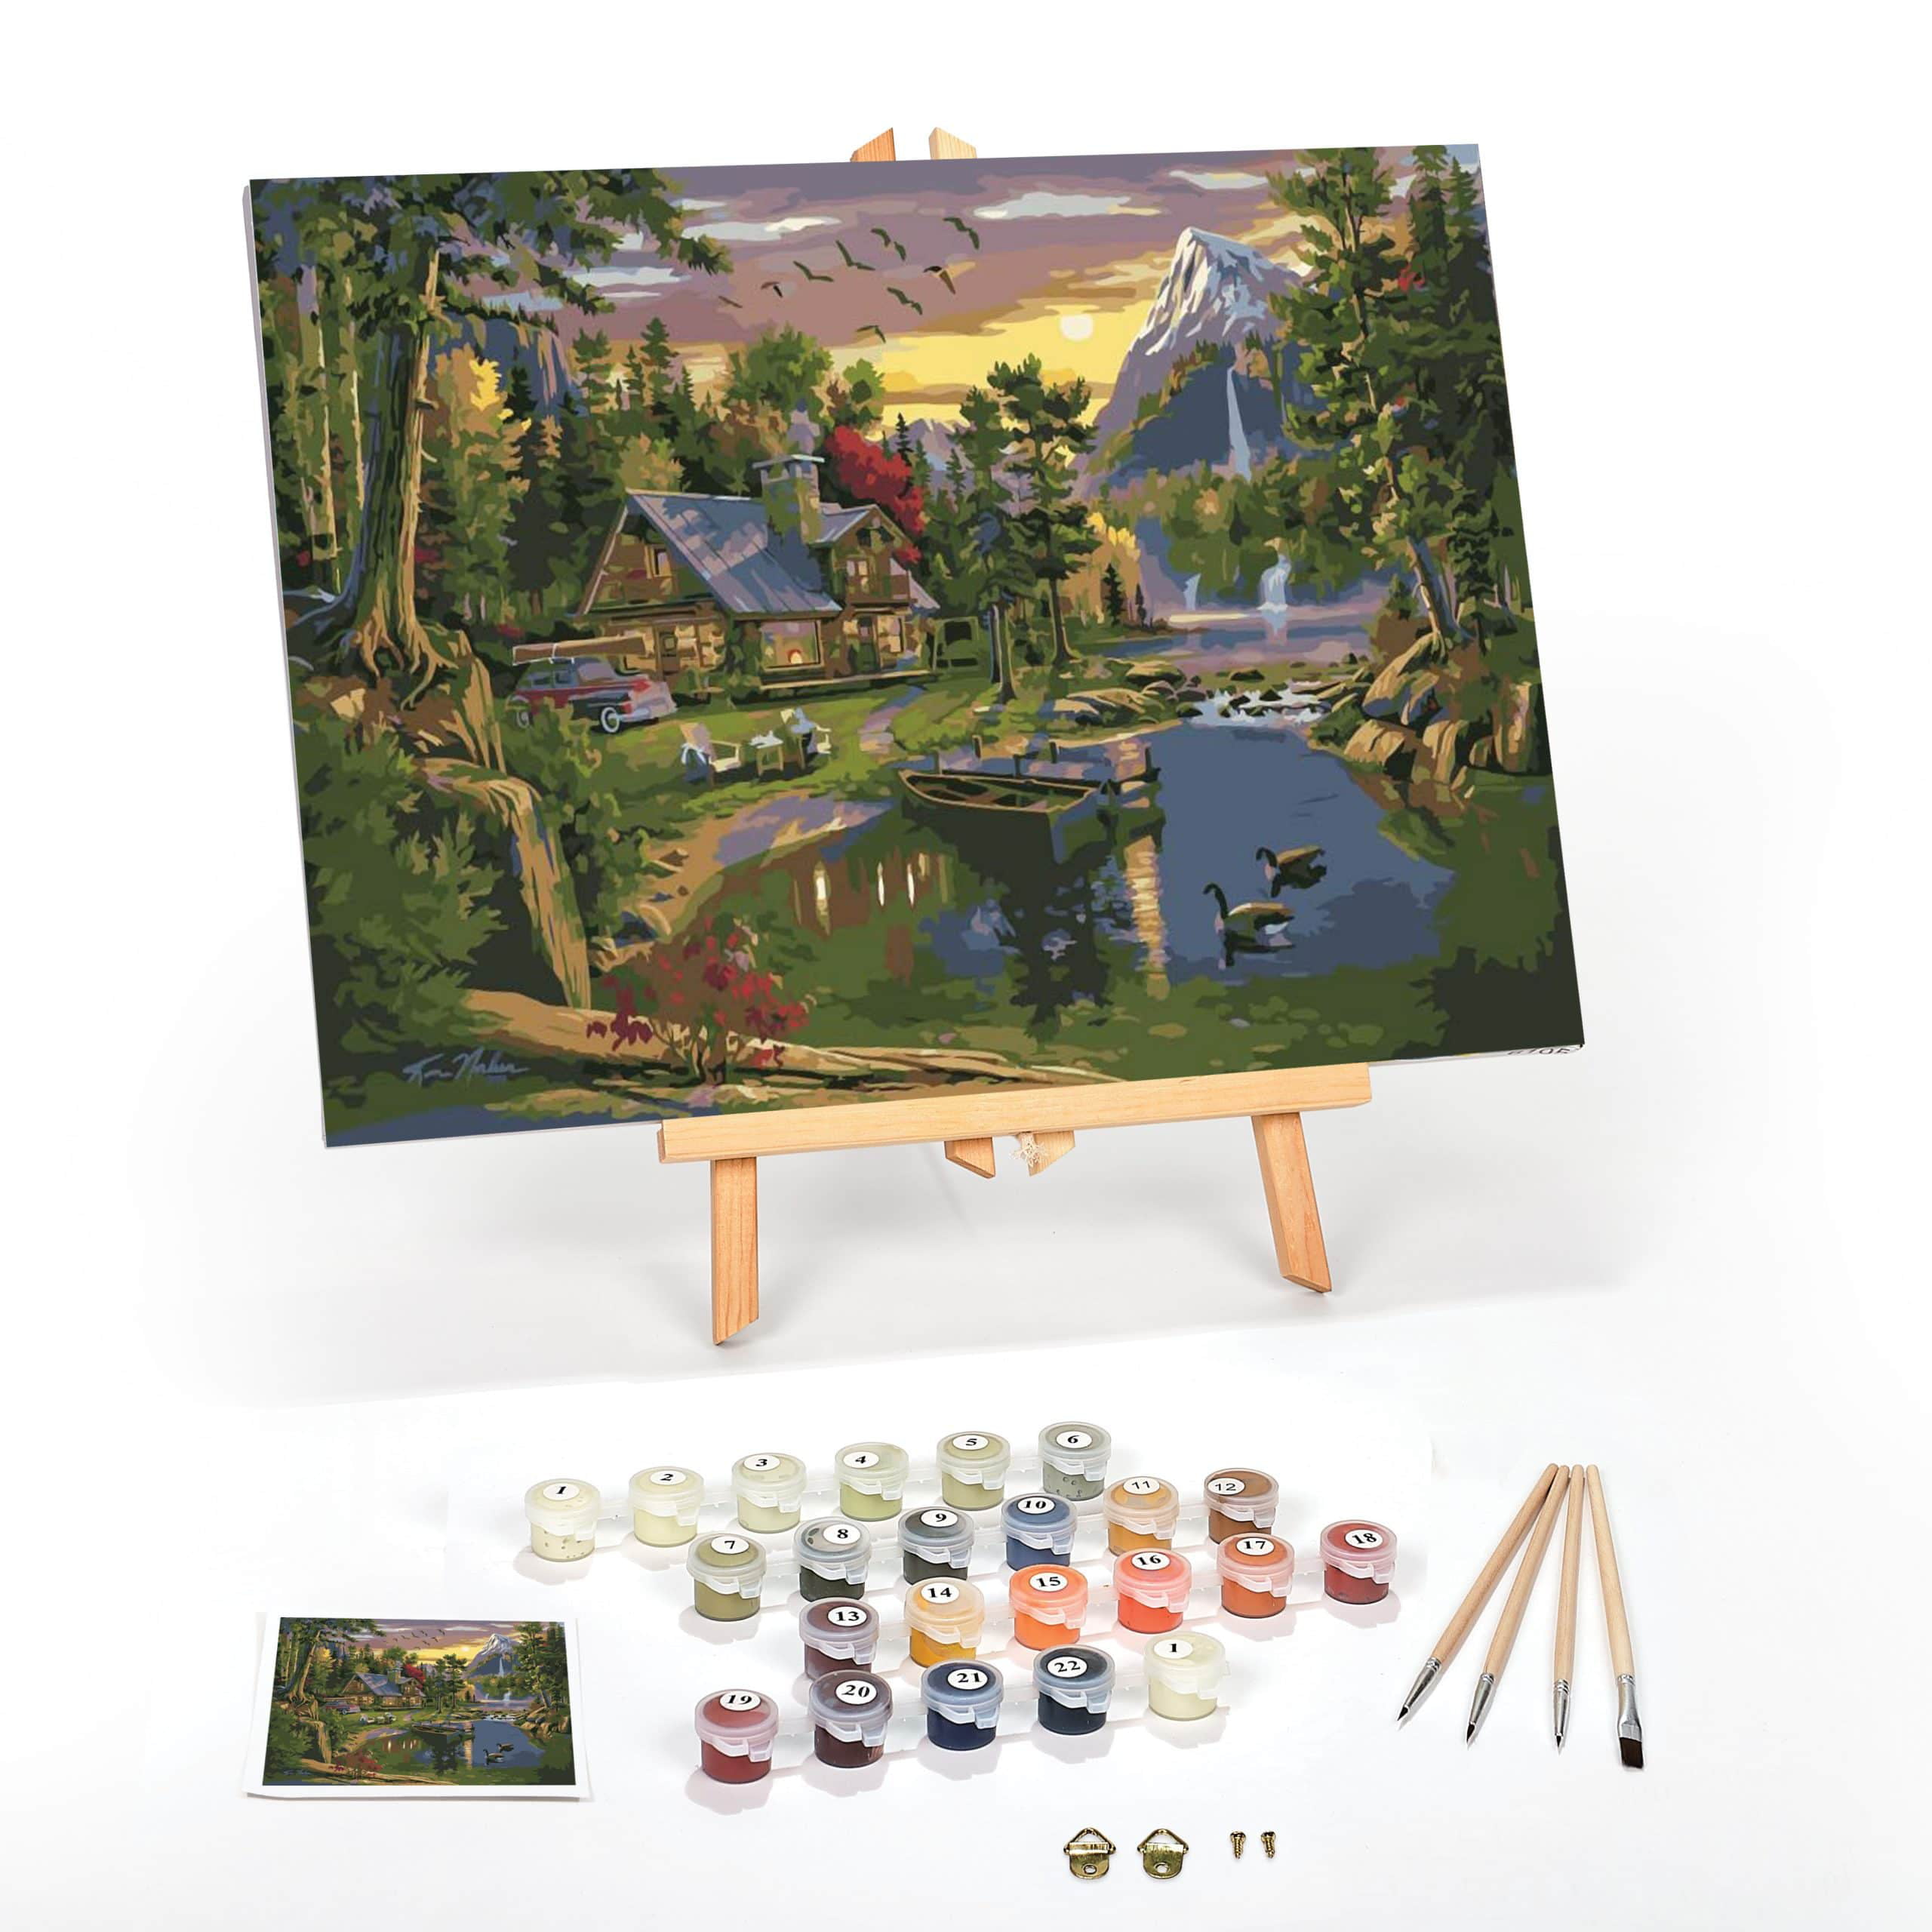 myPaintLab - Extra large paint by numbers themes on canvas